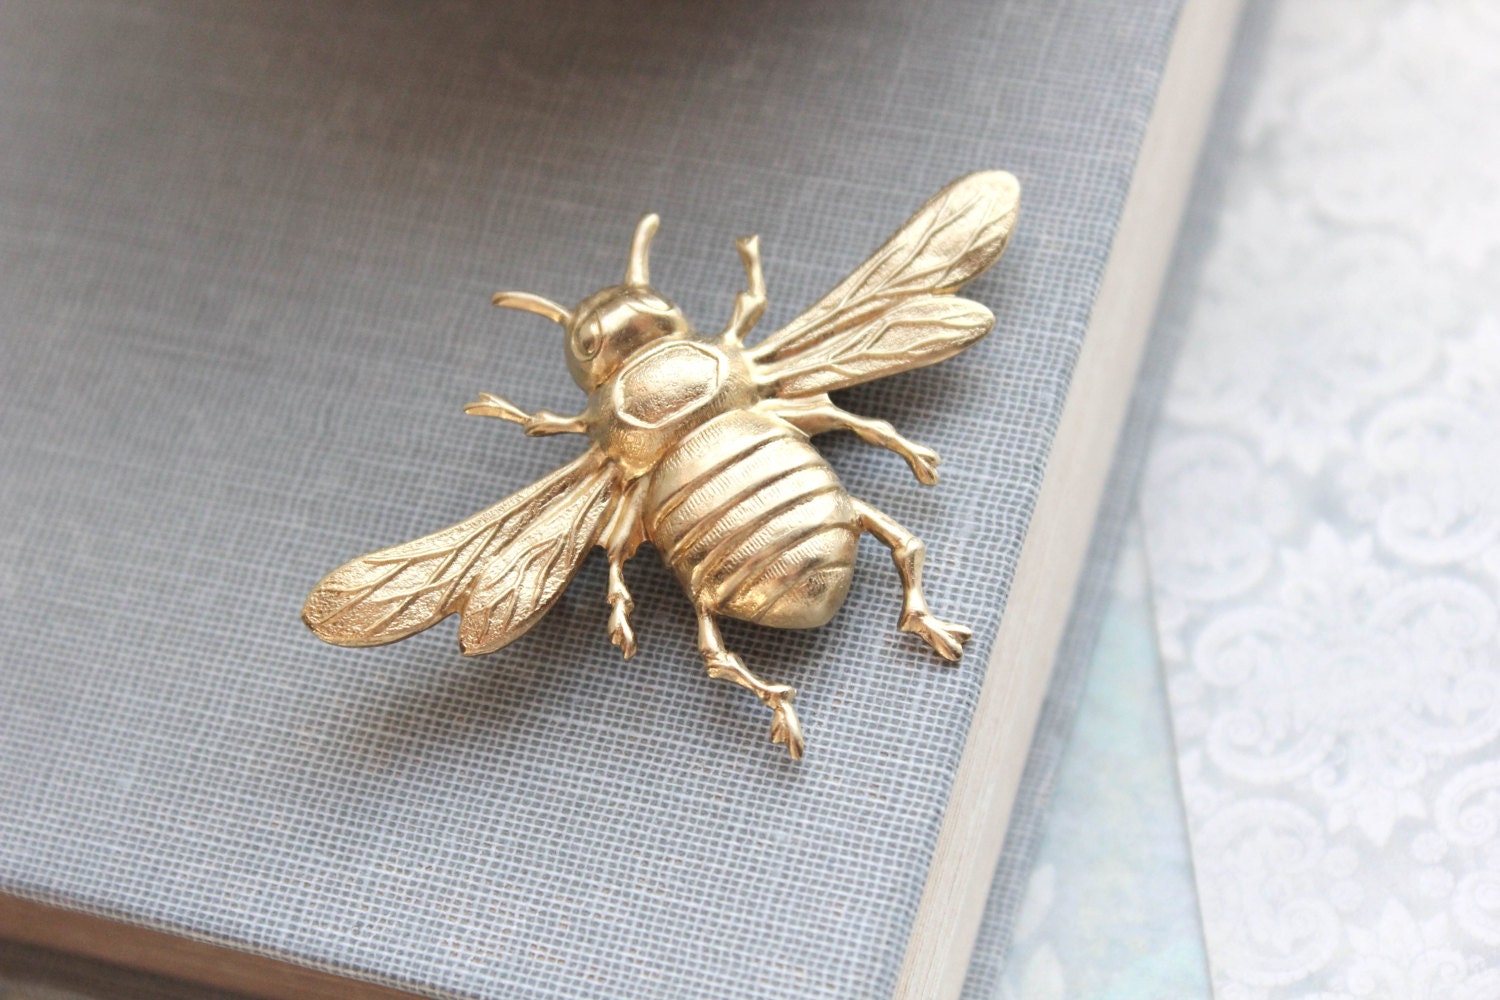 Her Raw for Entomology Wings Lapel Bee Nature Brooch Brass Woodland Natural Vintage Style History Etsy Rustic Pin Gold Israel Bee Brooch Gift Insect -